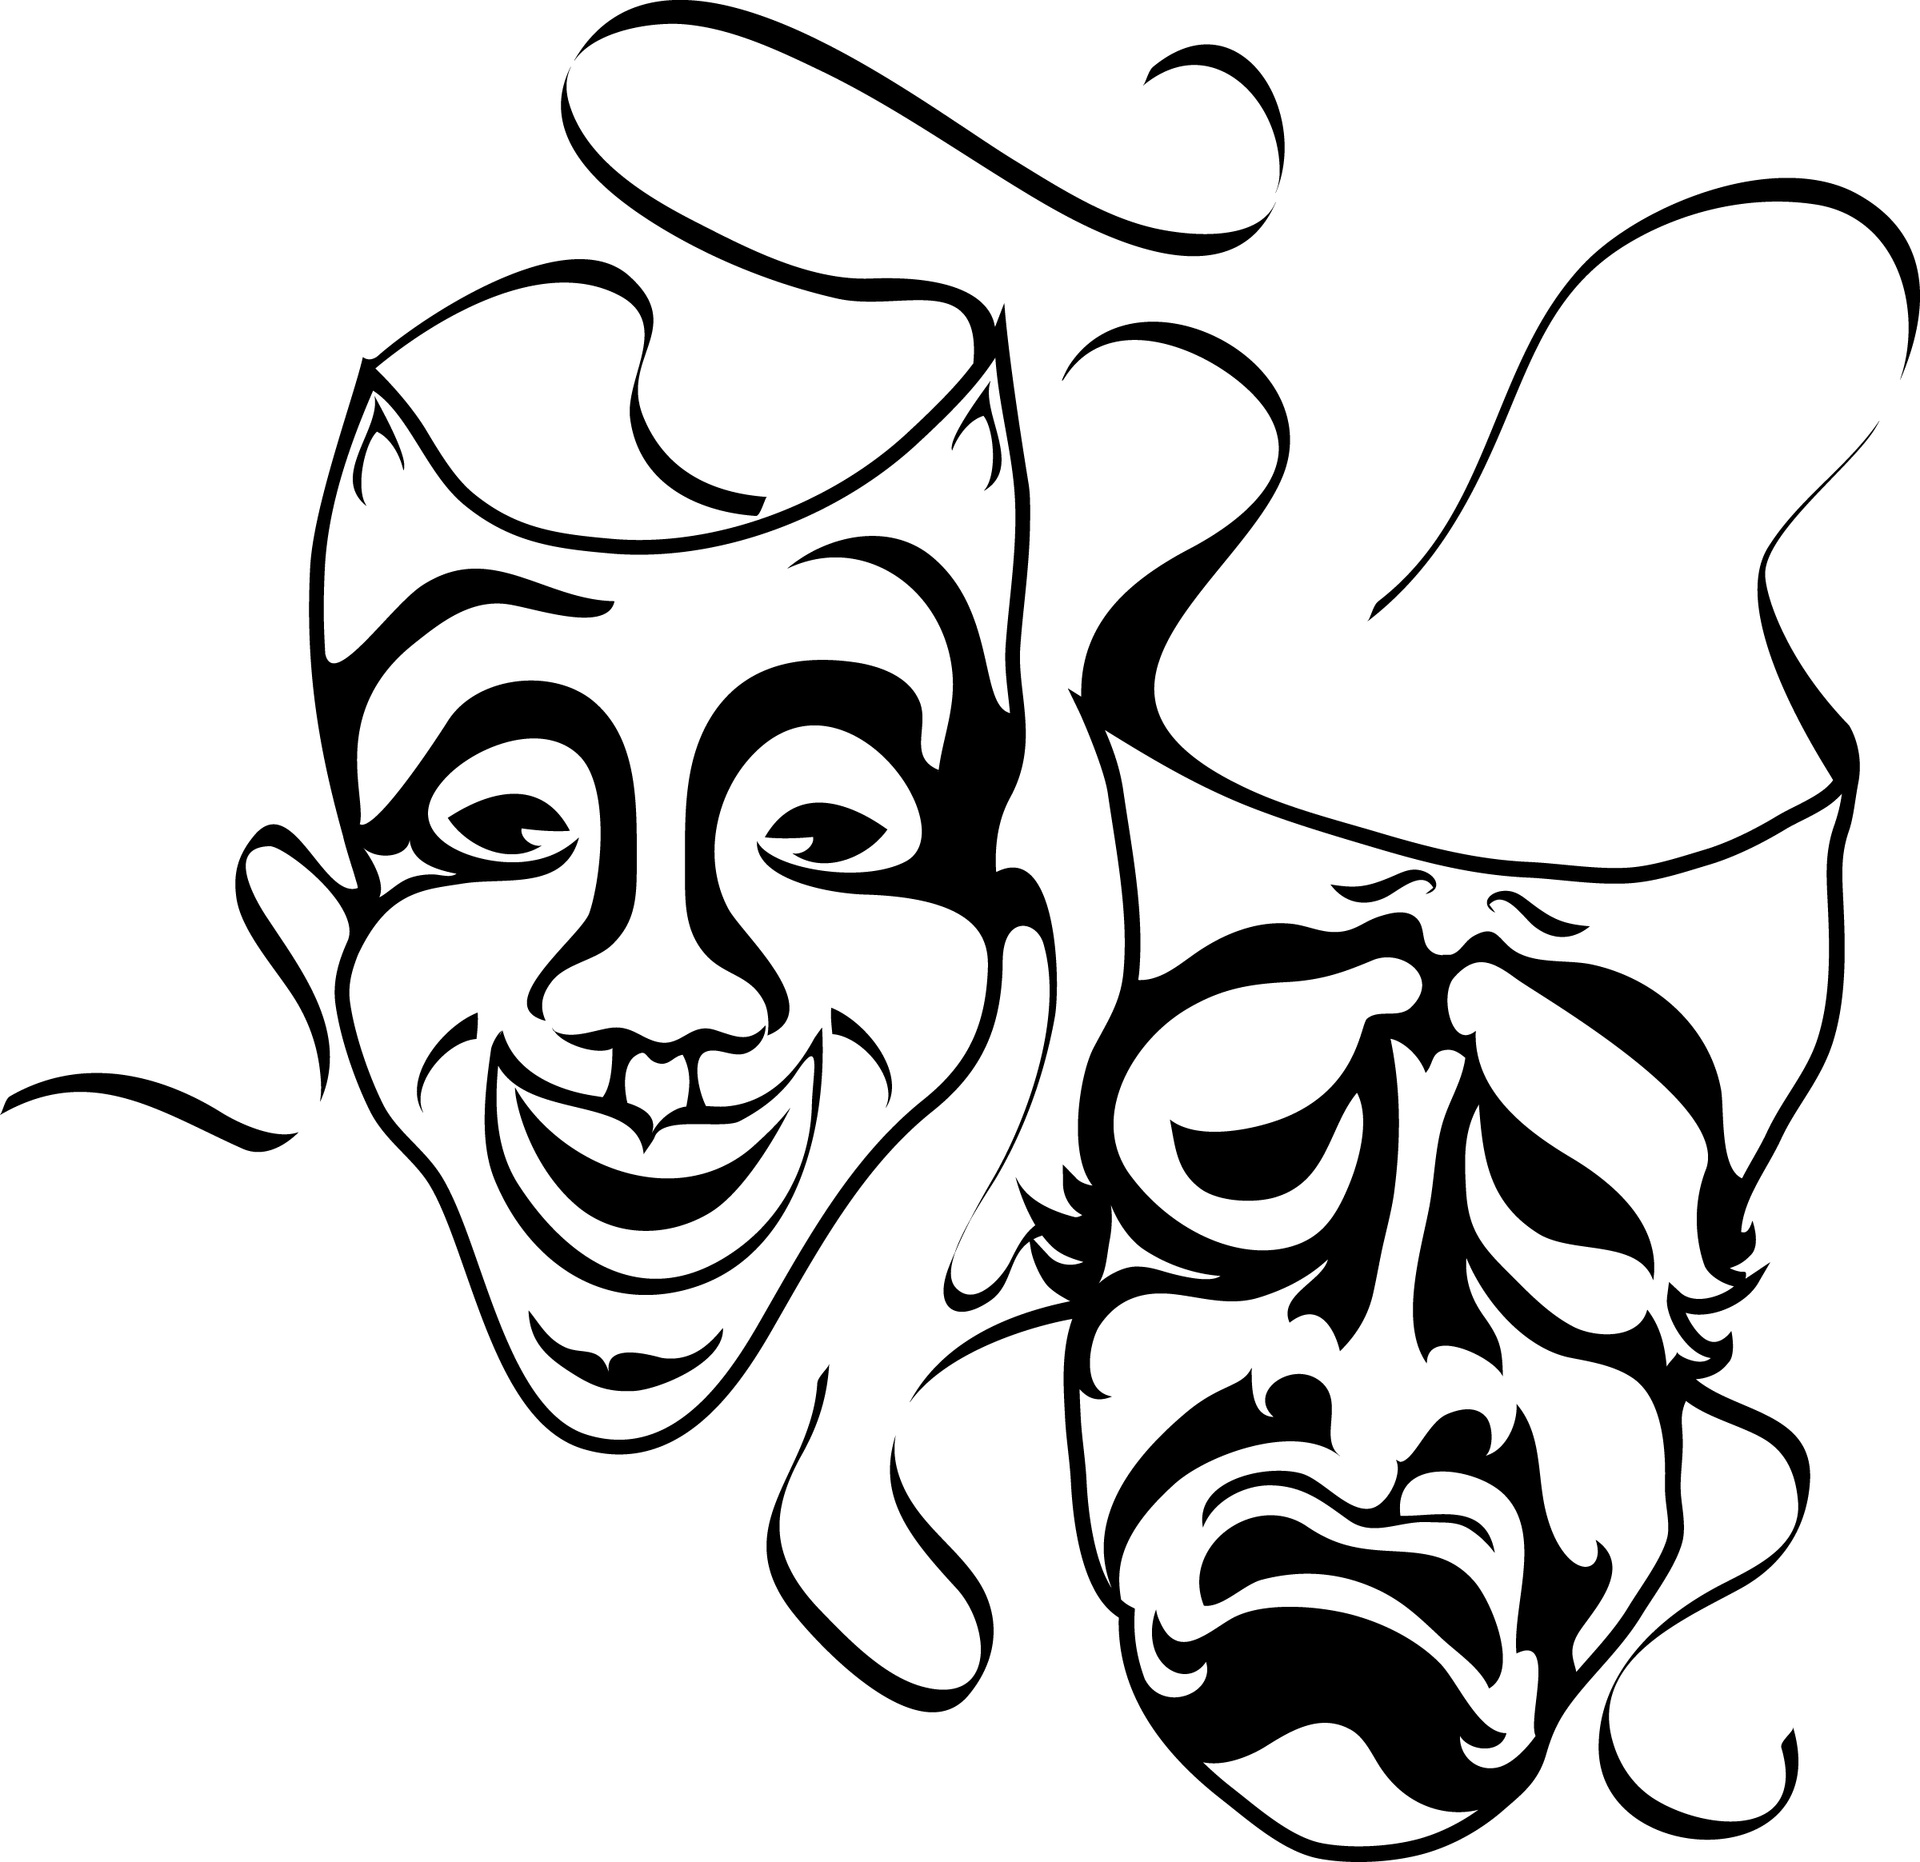 11 Black And White Drama Masks Free Cliparts That You Can Download To